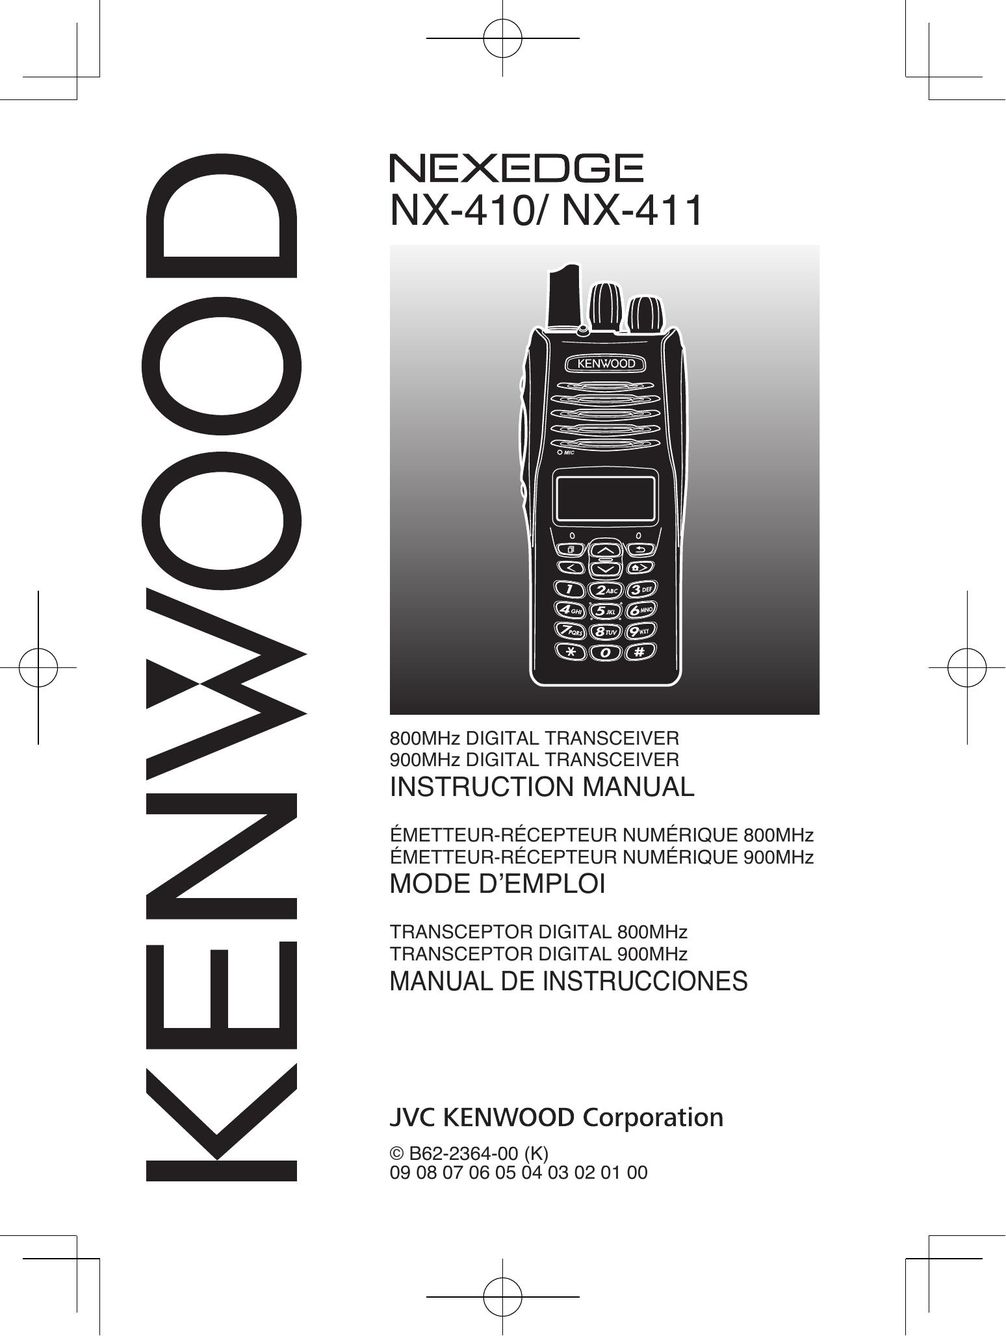 Kenwood NX-410 Home Security System User Manual